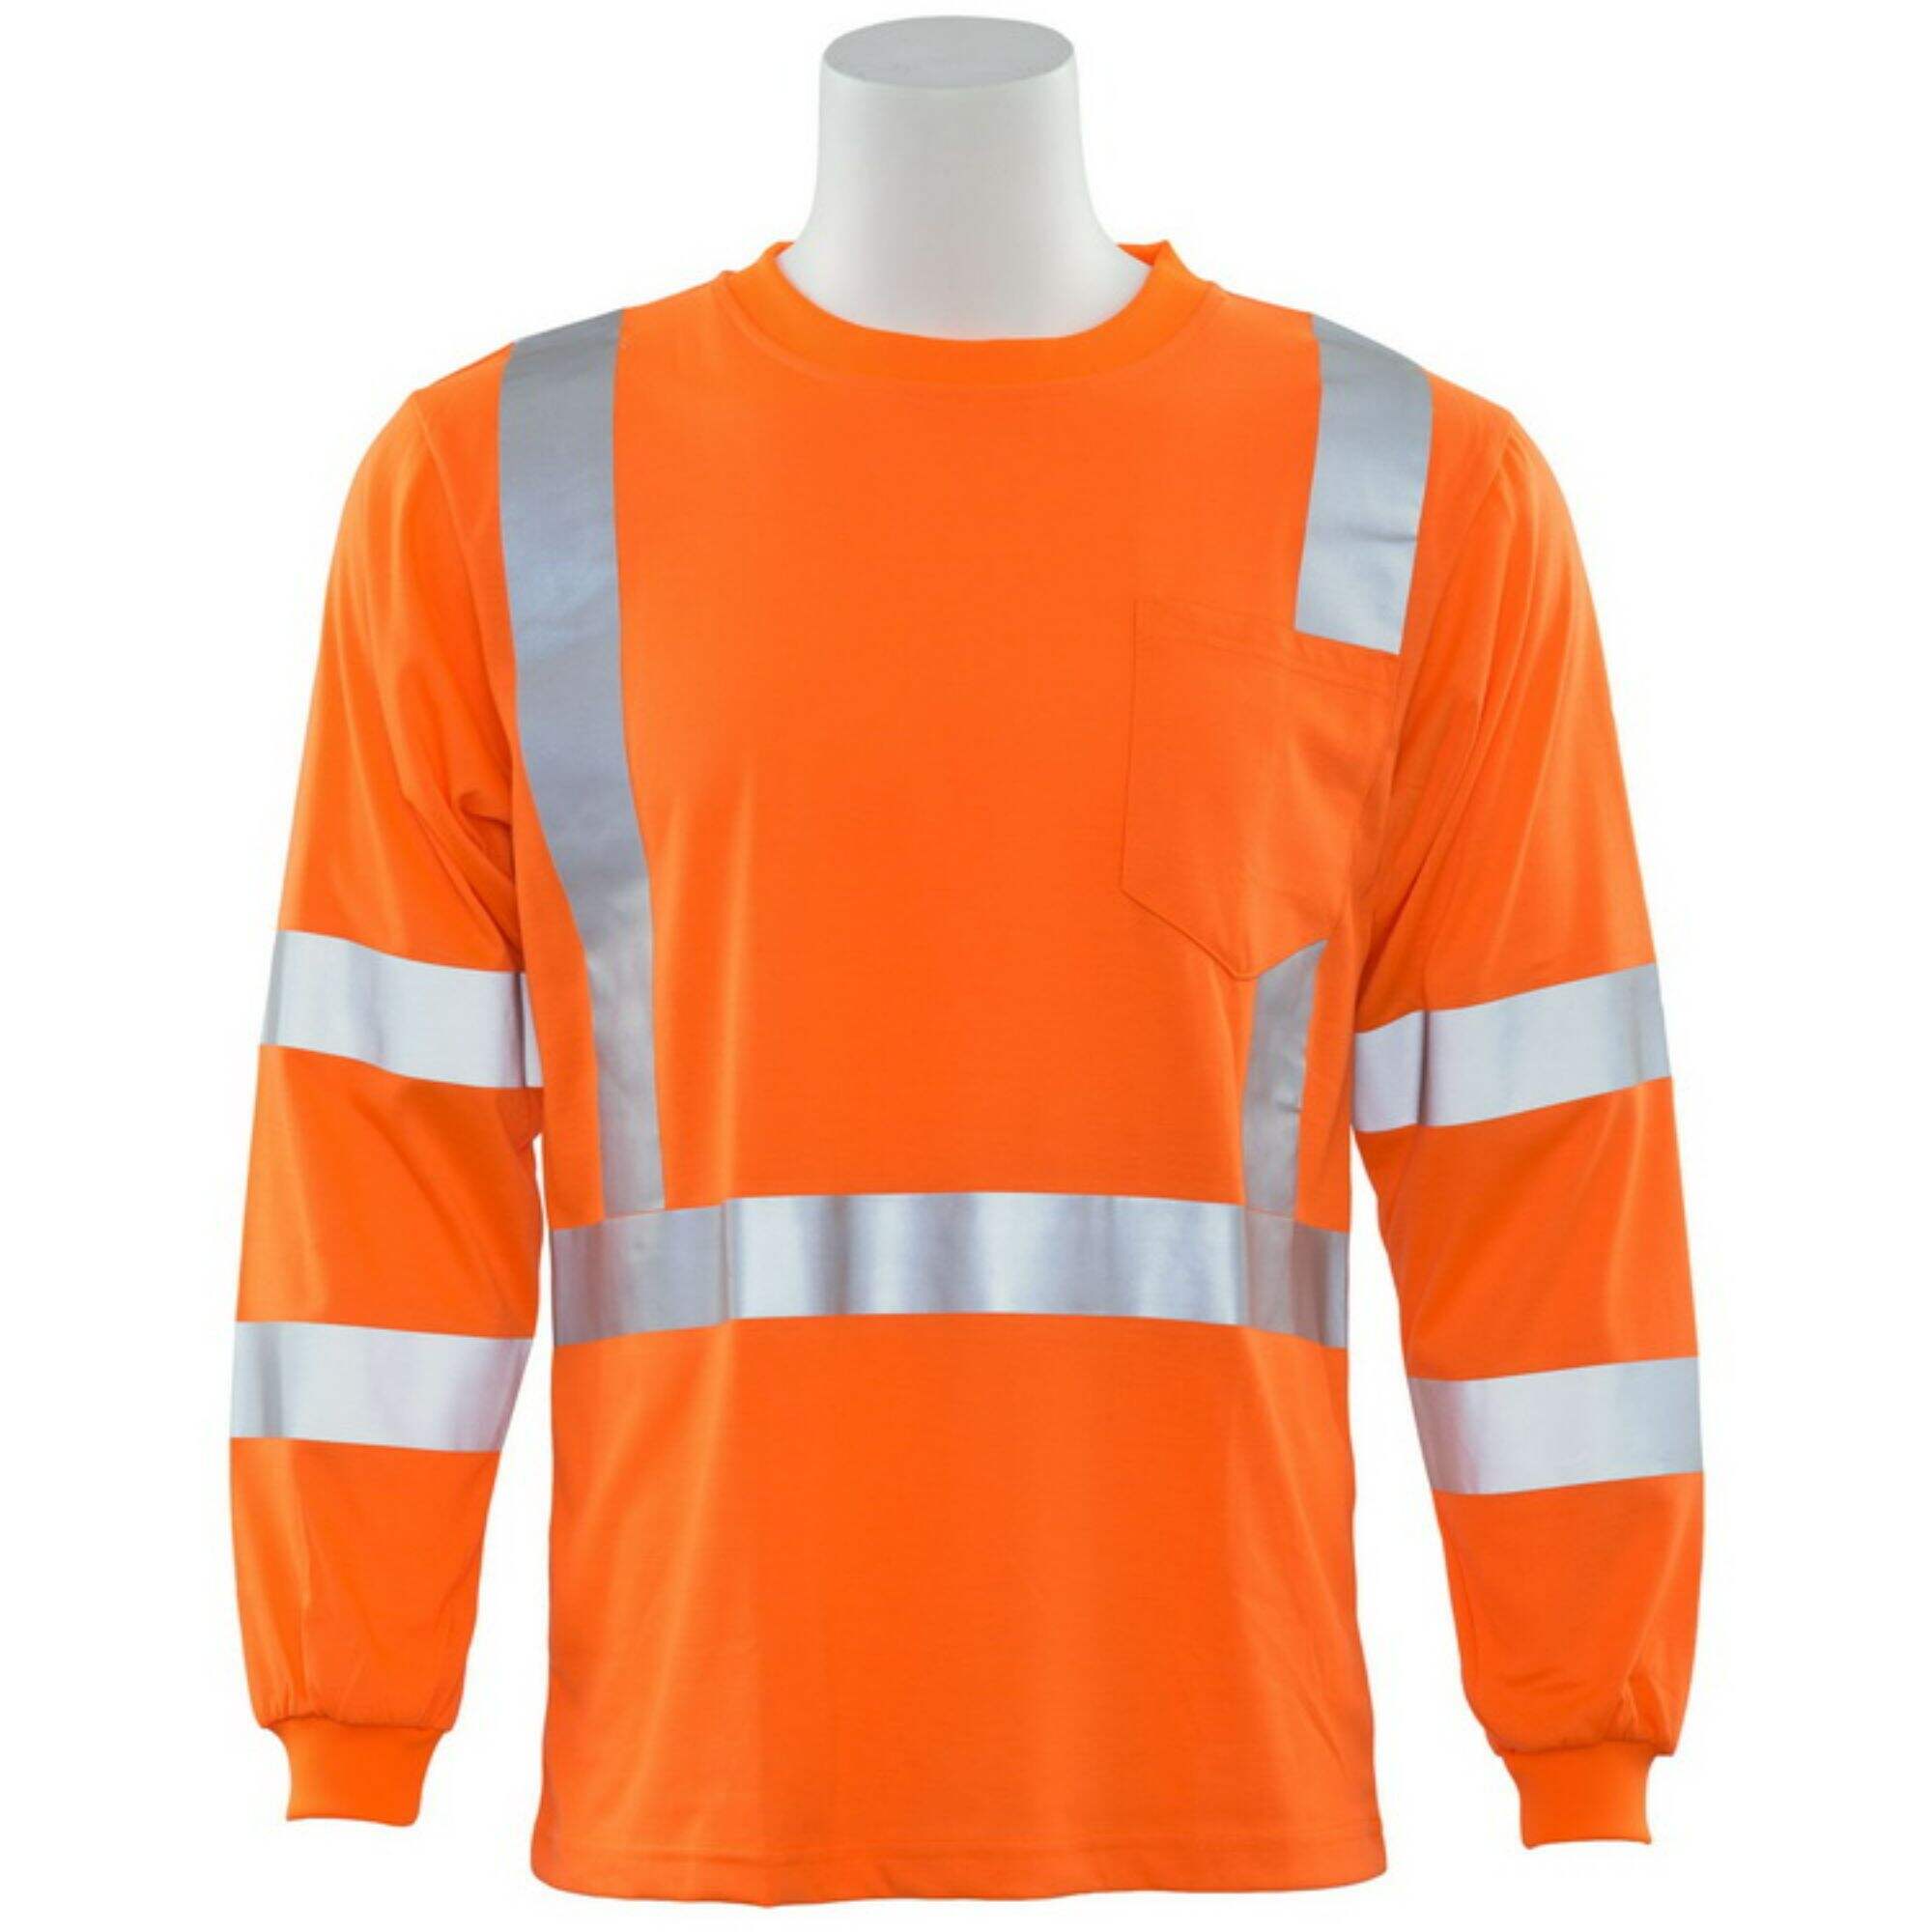 Safety Work Reflective High Visibility Sleeve Shirt Security Unisex Premium Clothes